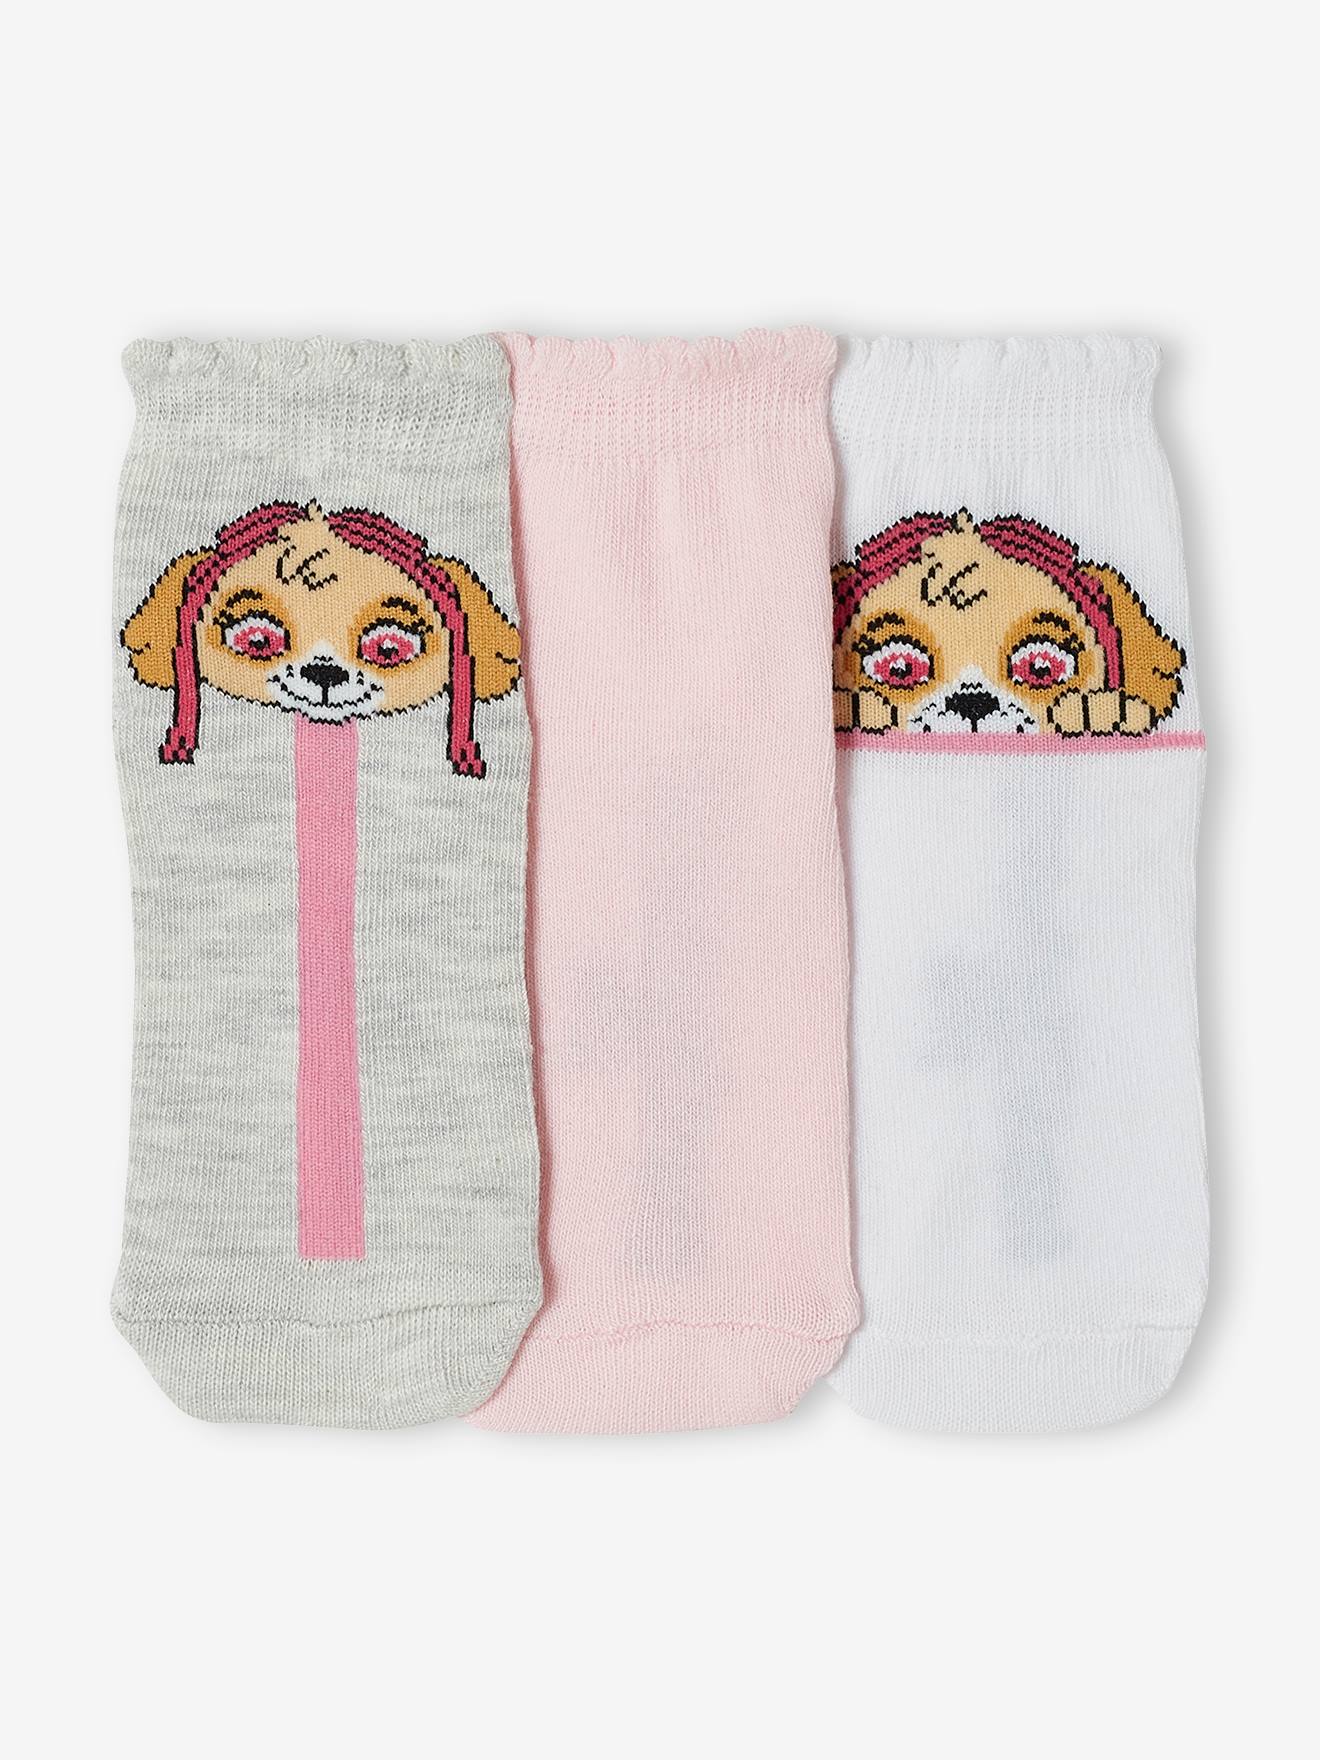 Pack of 3 Pairs of Paw Patrol® Socks for Girls - set pink